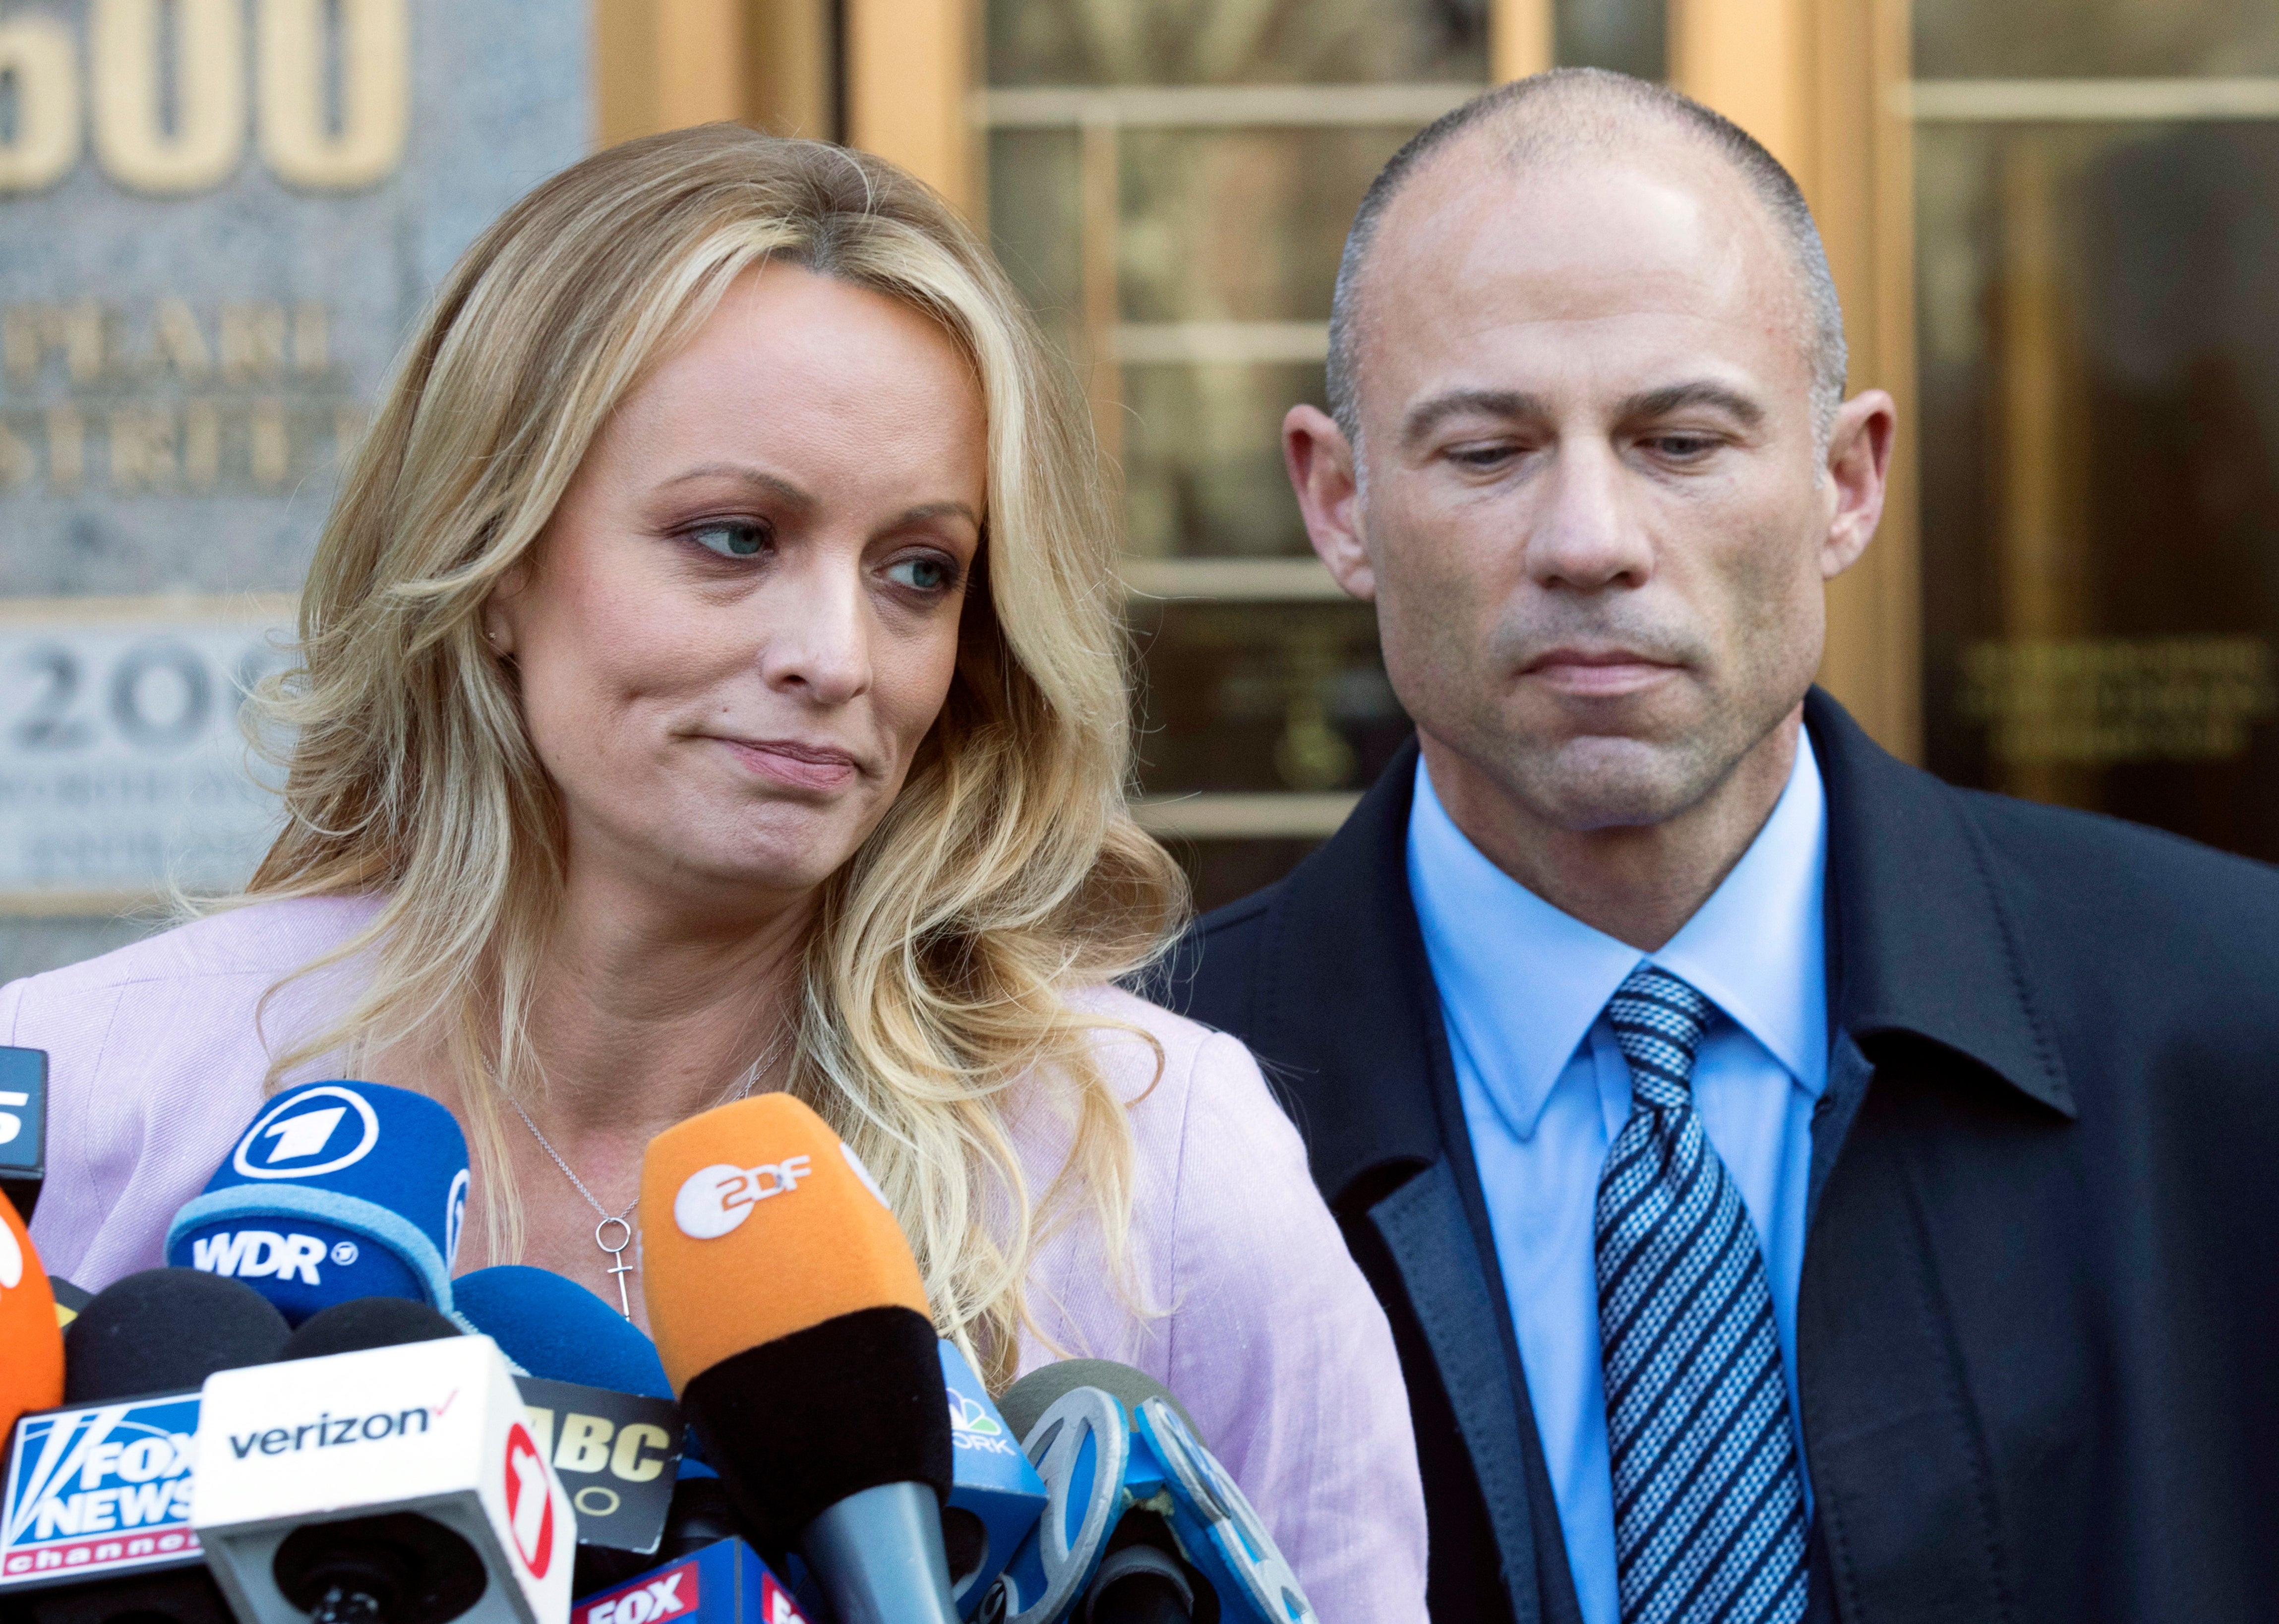 Stormy Daniels and Michael Avenatti before their falling out